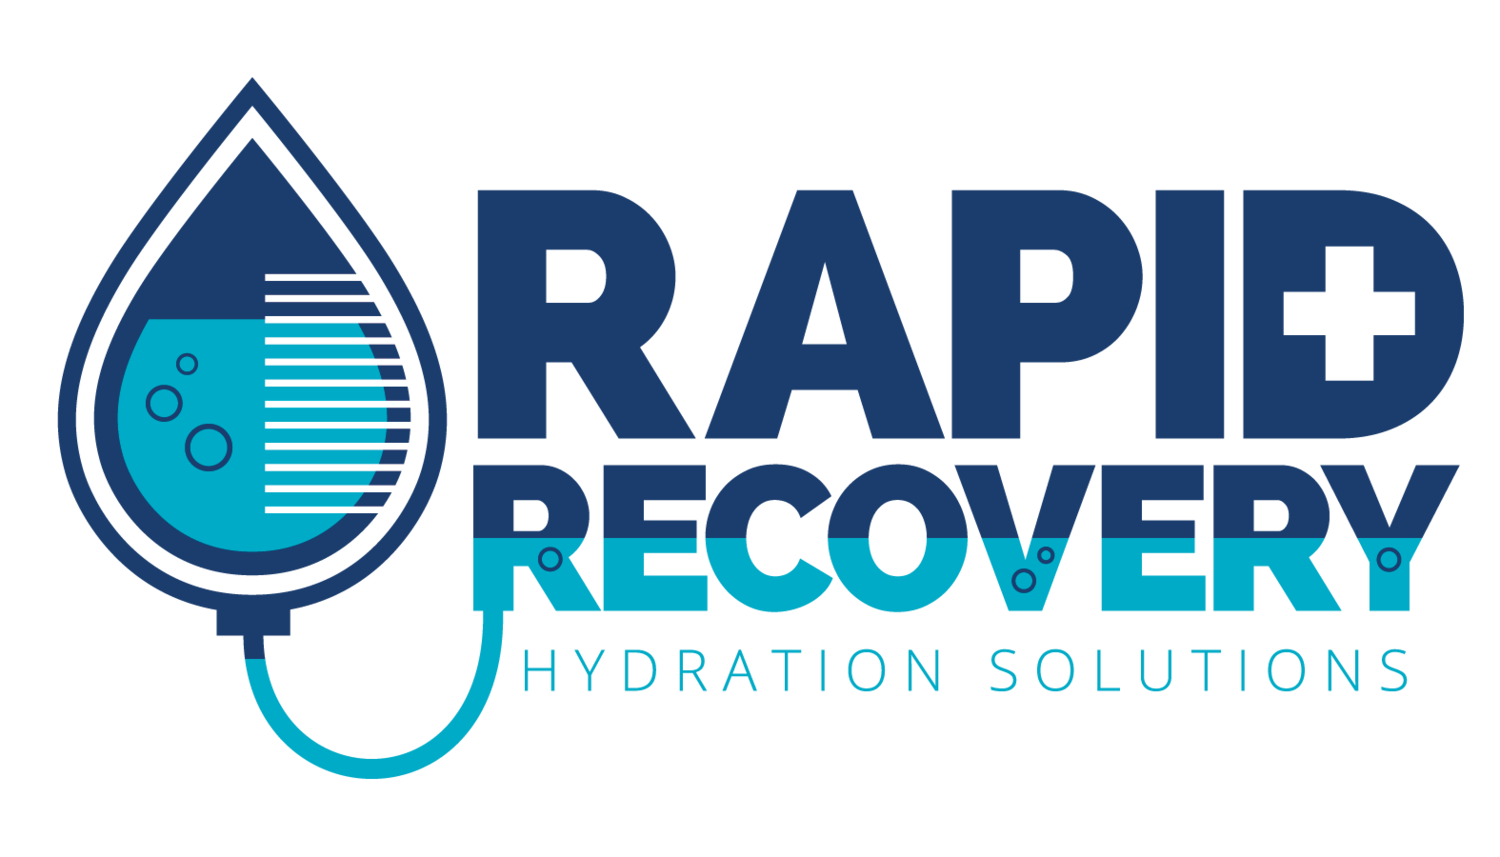 Rapid Recovery Hydration Solutions